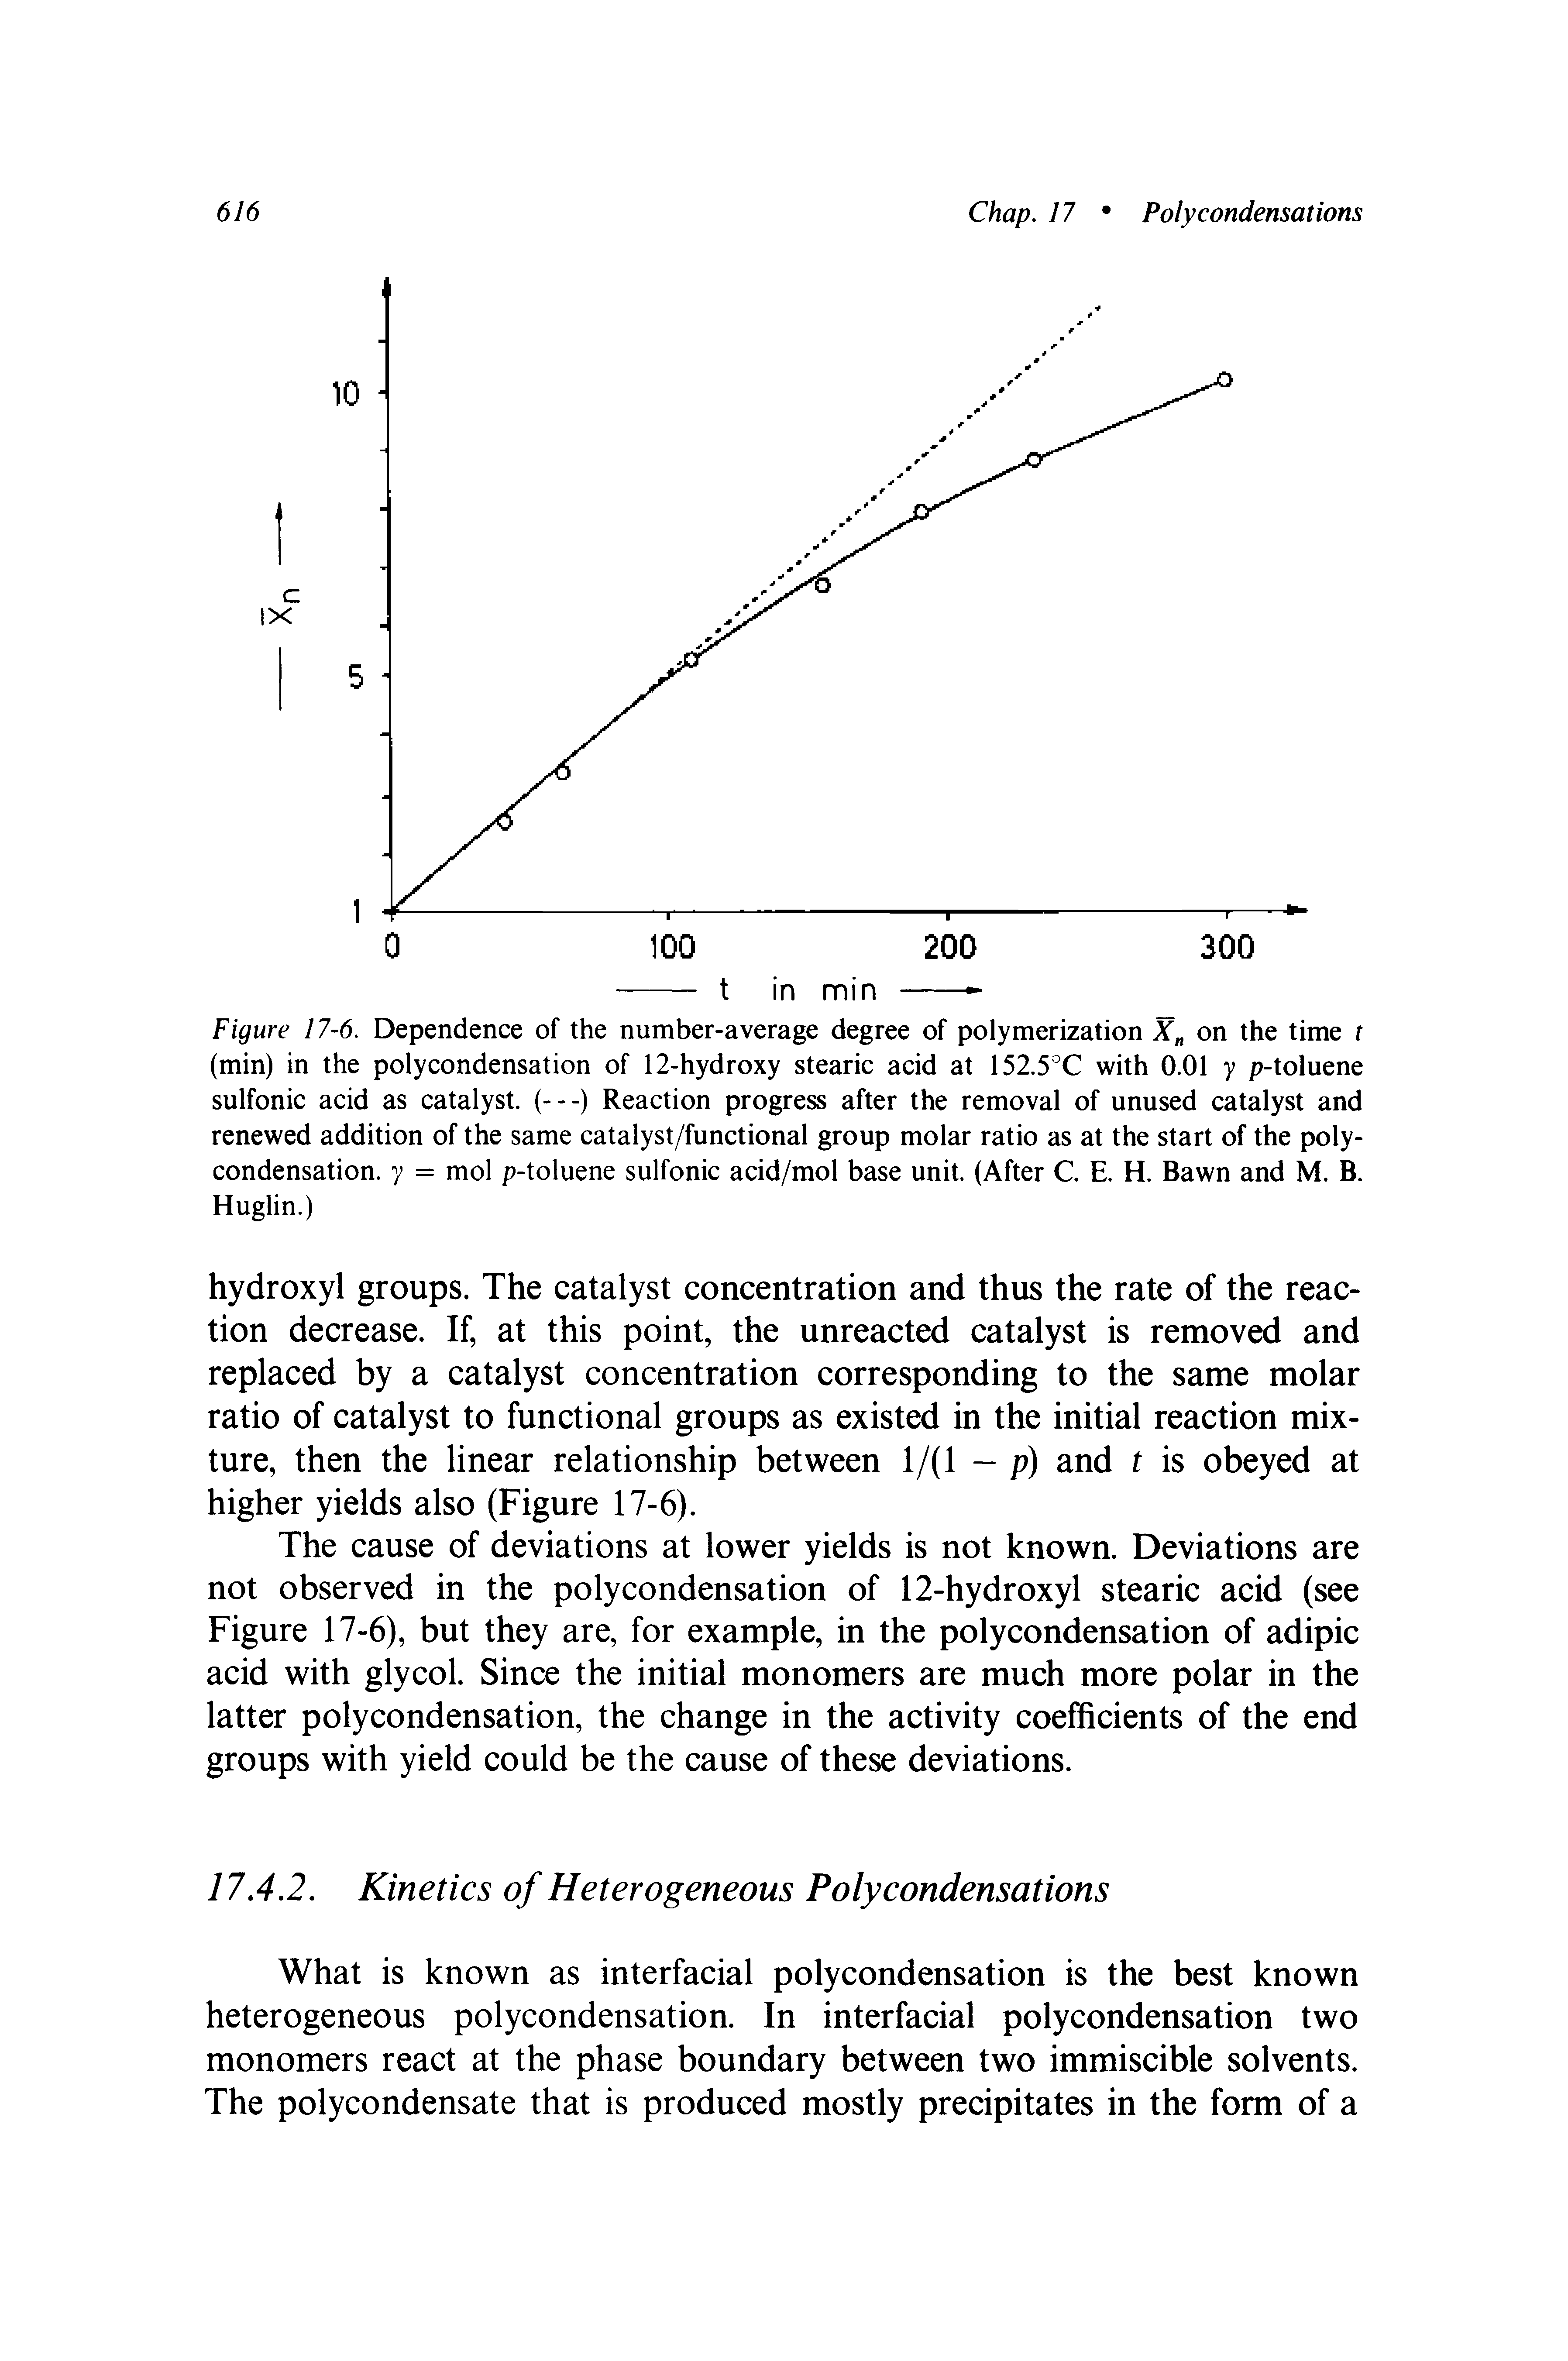 Figure 17-6. Dependence of the number-average degree of polymerization X on the time t (min) in the polycondensation of 12-hydroxy stearic acid at 152.5 C with 0.01 y p-toluene sulfonic acid as catalyst. (---) Reaction progress after the removal of unused catalyst and renewed addition of the same catalyst/functional group molar ratio as at the start of the polycondensation. y = mol p-toluene sulfonic acid/mol base unit. (After C E. H. Bawn and M. B. Huglin.)...